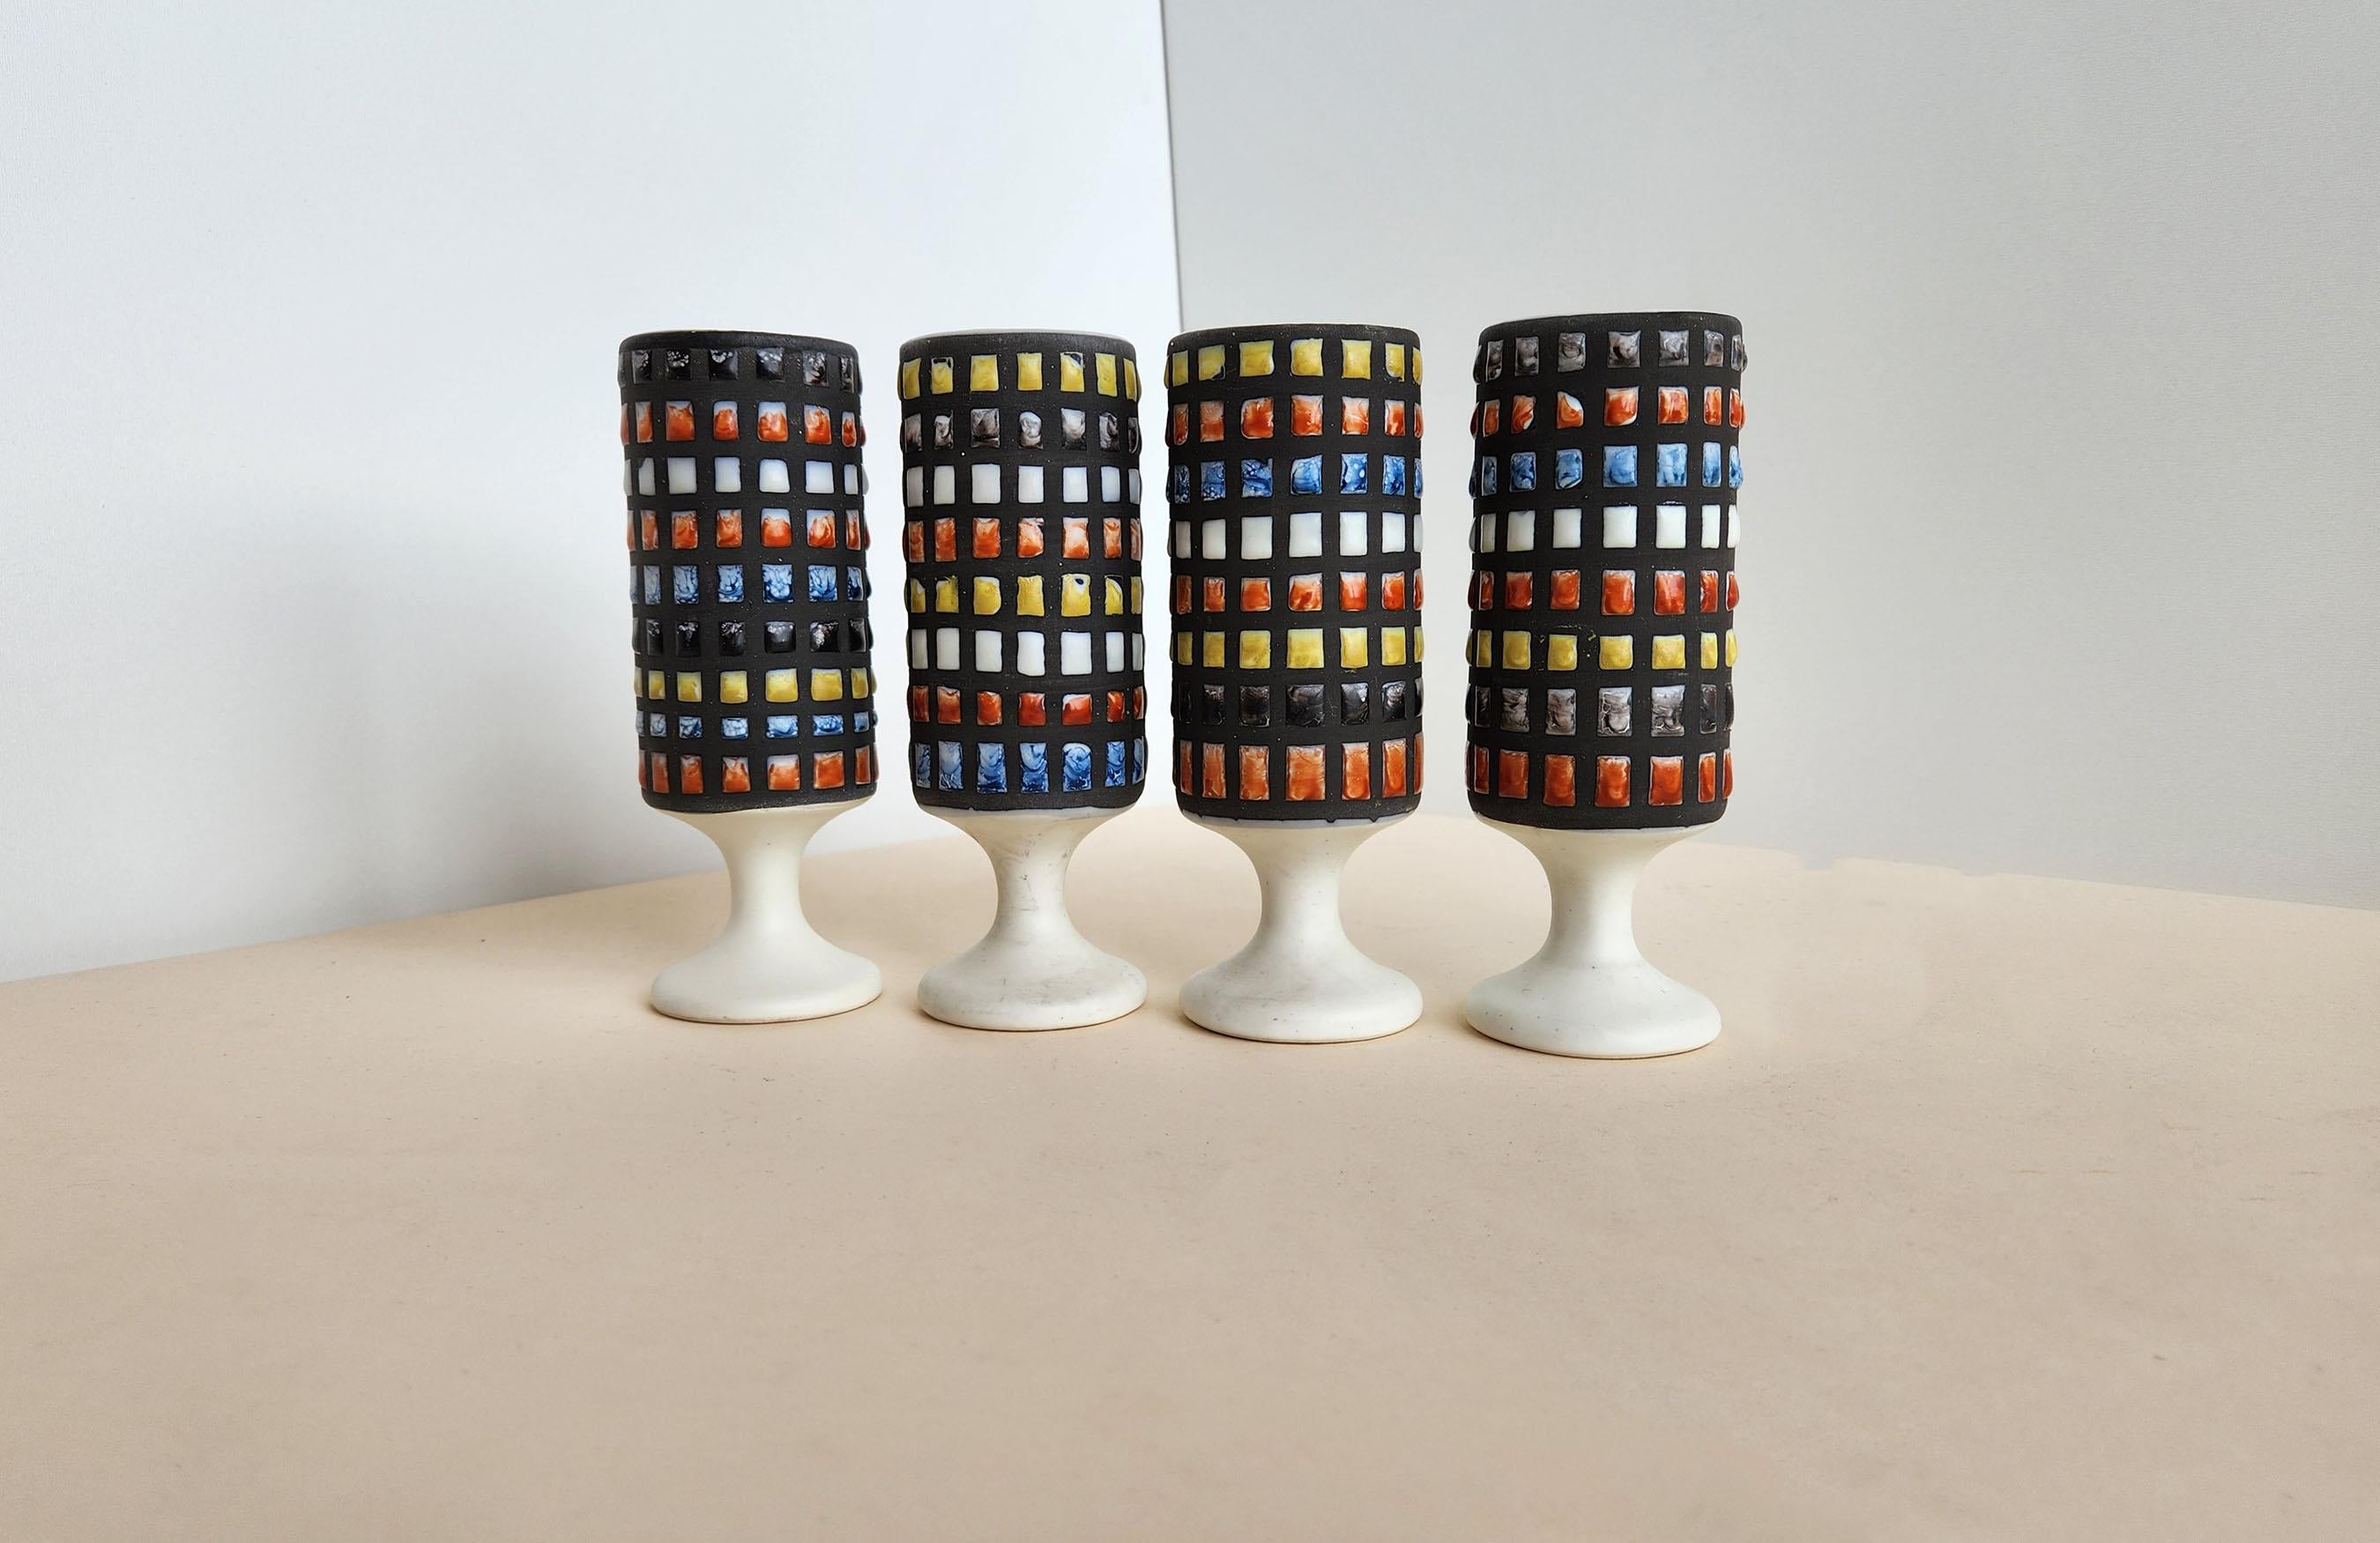 Set of 4 Vintage Ceramic Goblets with Cobblestones by Roger Capron - Vallauris, France

Roger Capron was in influential French ceramicist, known for his tiled tables and his use of recurring motifs such as stylized branches and geometrical suns.  